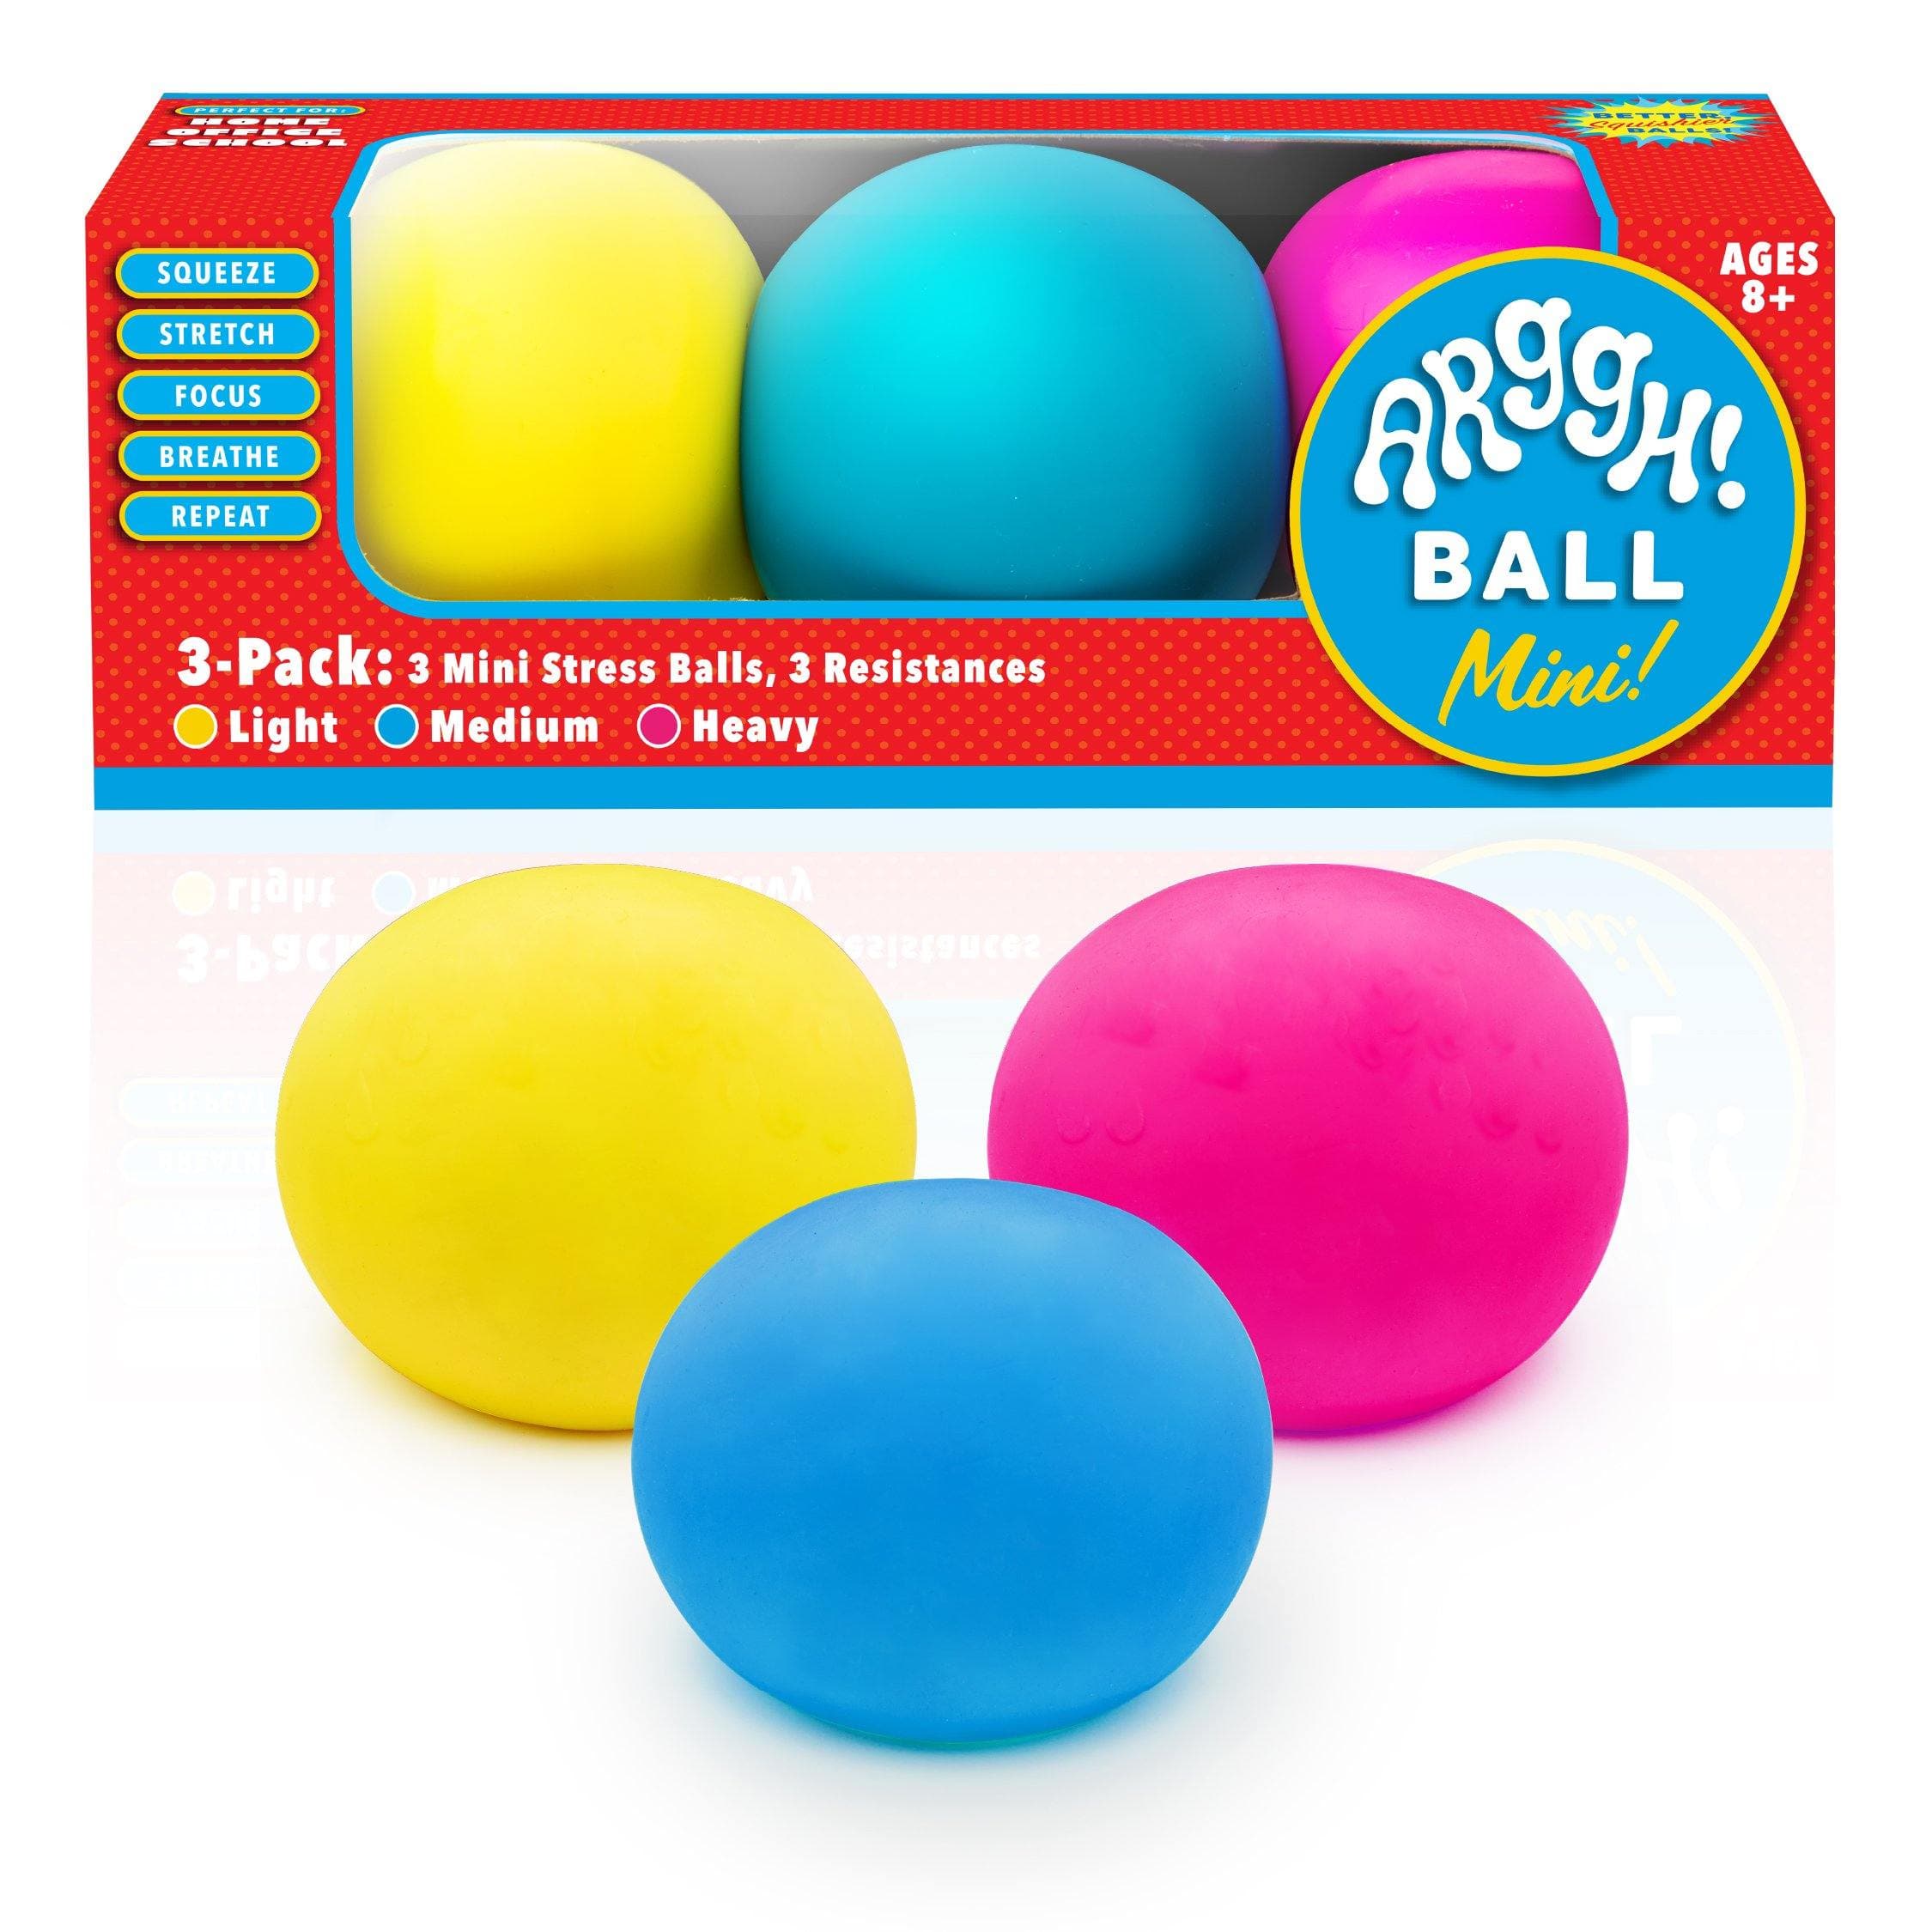 Squeeze Goo Balls - Set of 3, Vest your stress and anxiety out with these 3 stress balls filled with glitter. Use it as a calming toy to help kids relax and develop focus. These glitter stress balls are fun to play and easy to keep clean. 3 Mini Stress Balls: Each pack of these mini stress balls include 1 light (yellow), 1 medium (blue), and 1 heavy (pink) stress ball resistances - perfect for both physical and emotional stress relief Color Changing Squishy Balls: Vent stress, anxiety, anger or use as a for